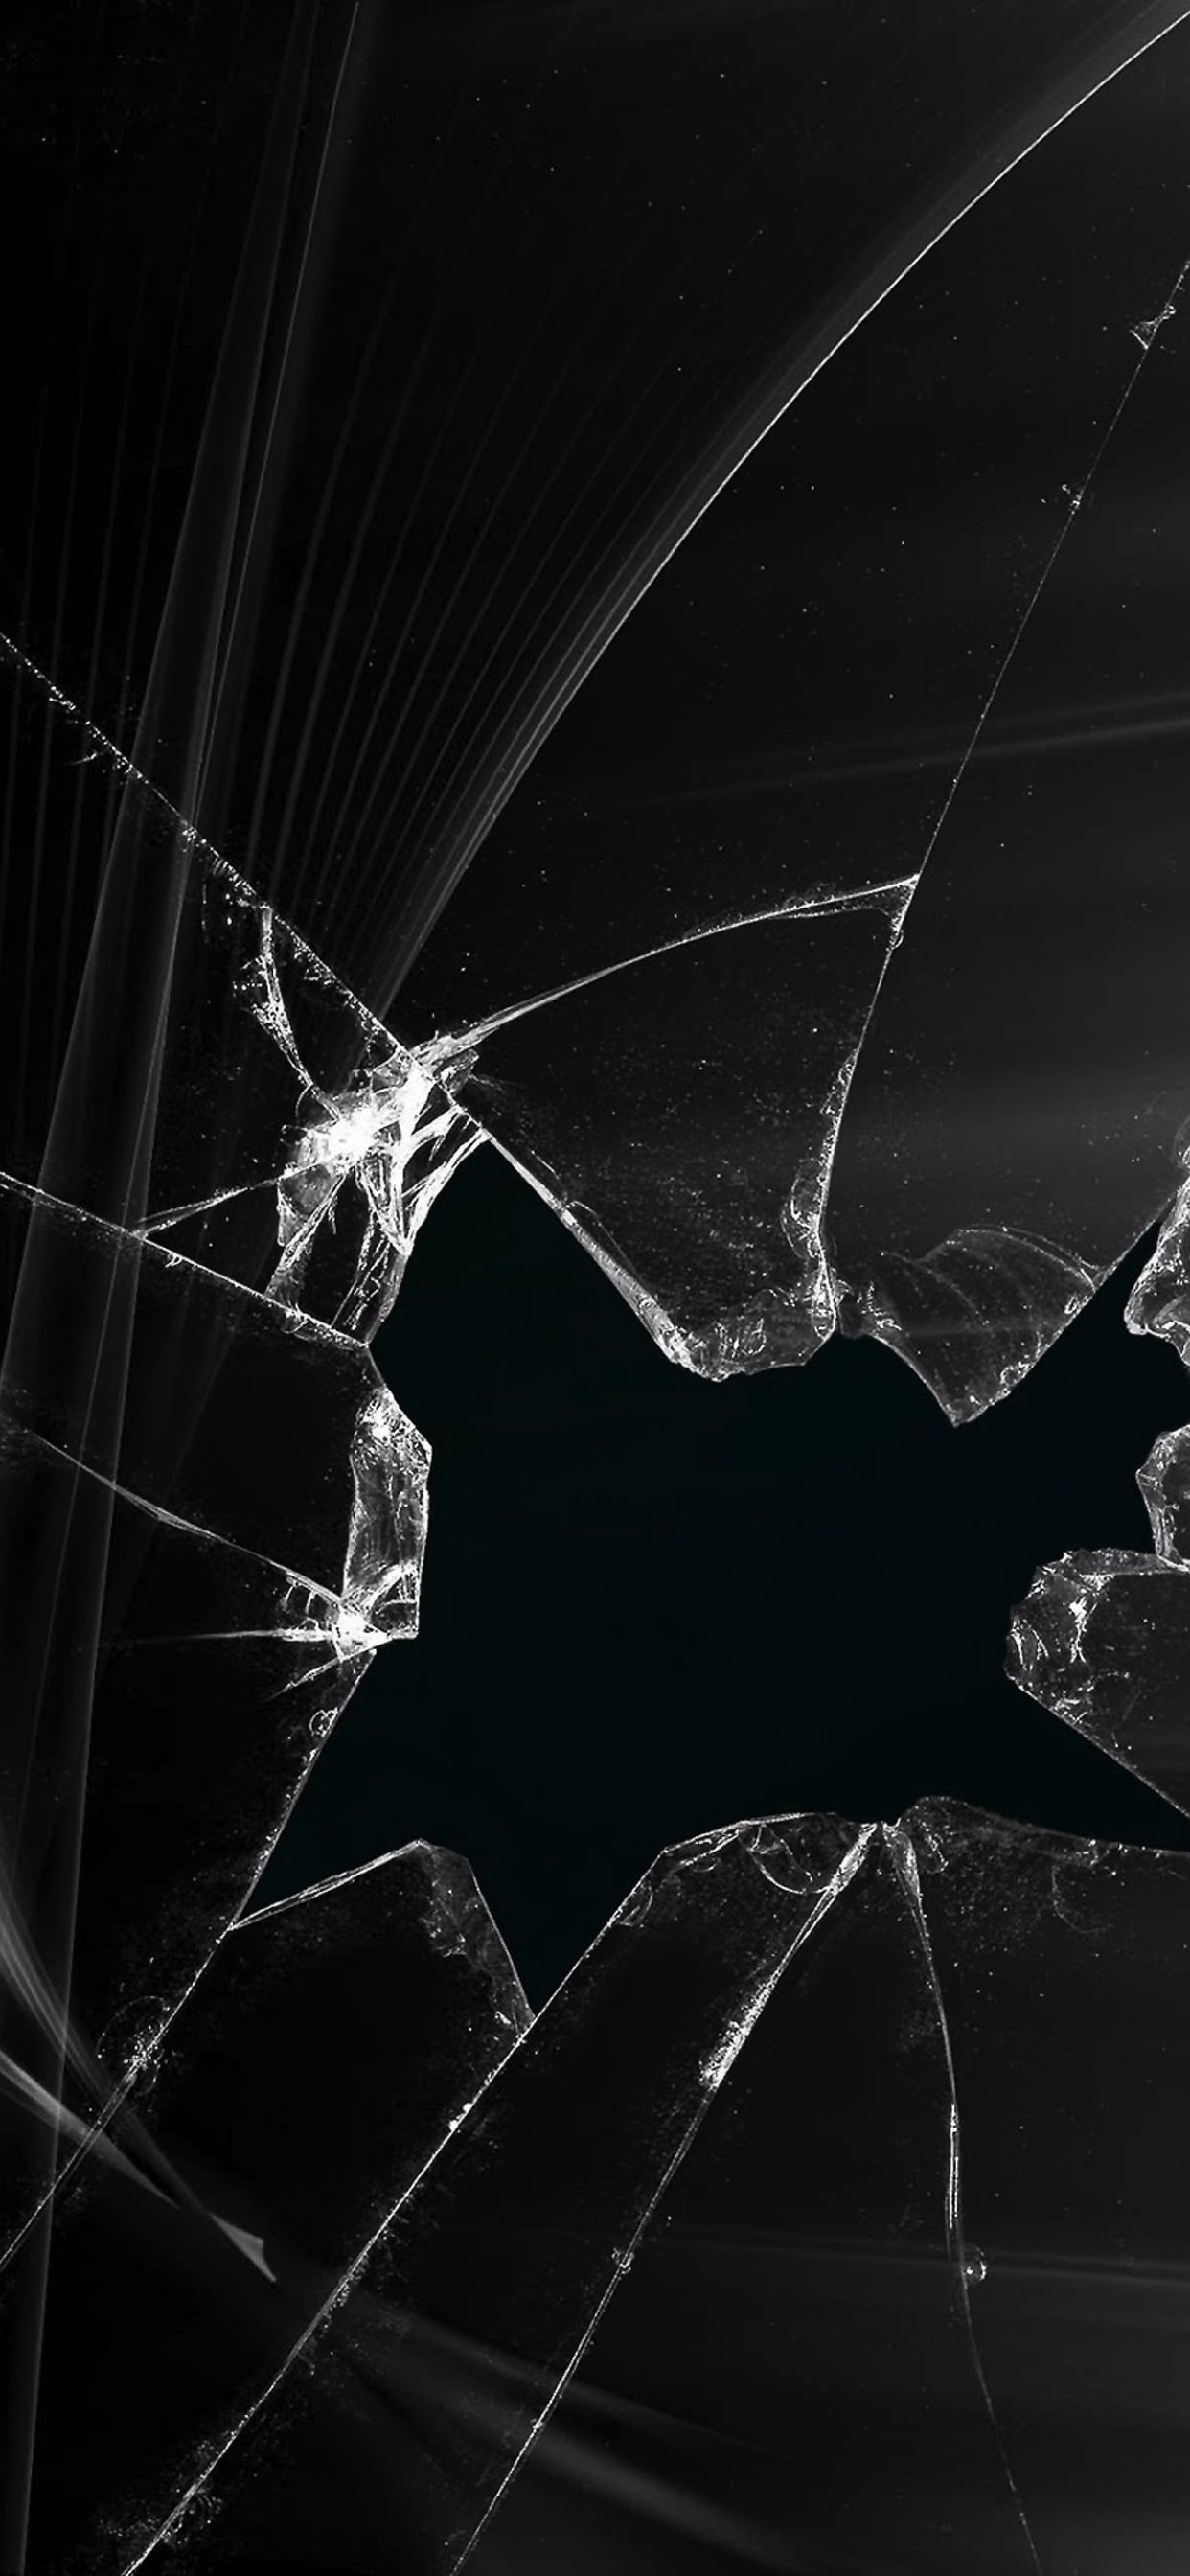 Glass Is Cracked Display Screen Black Wallpaper Sc Iphone Xs Max